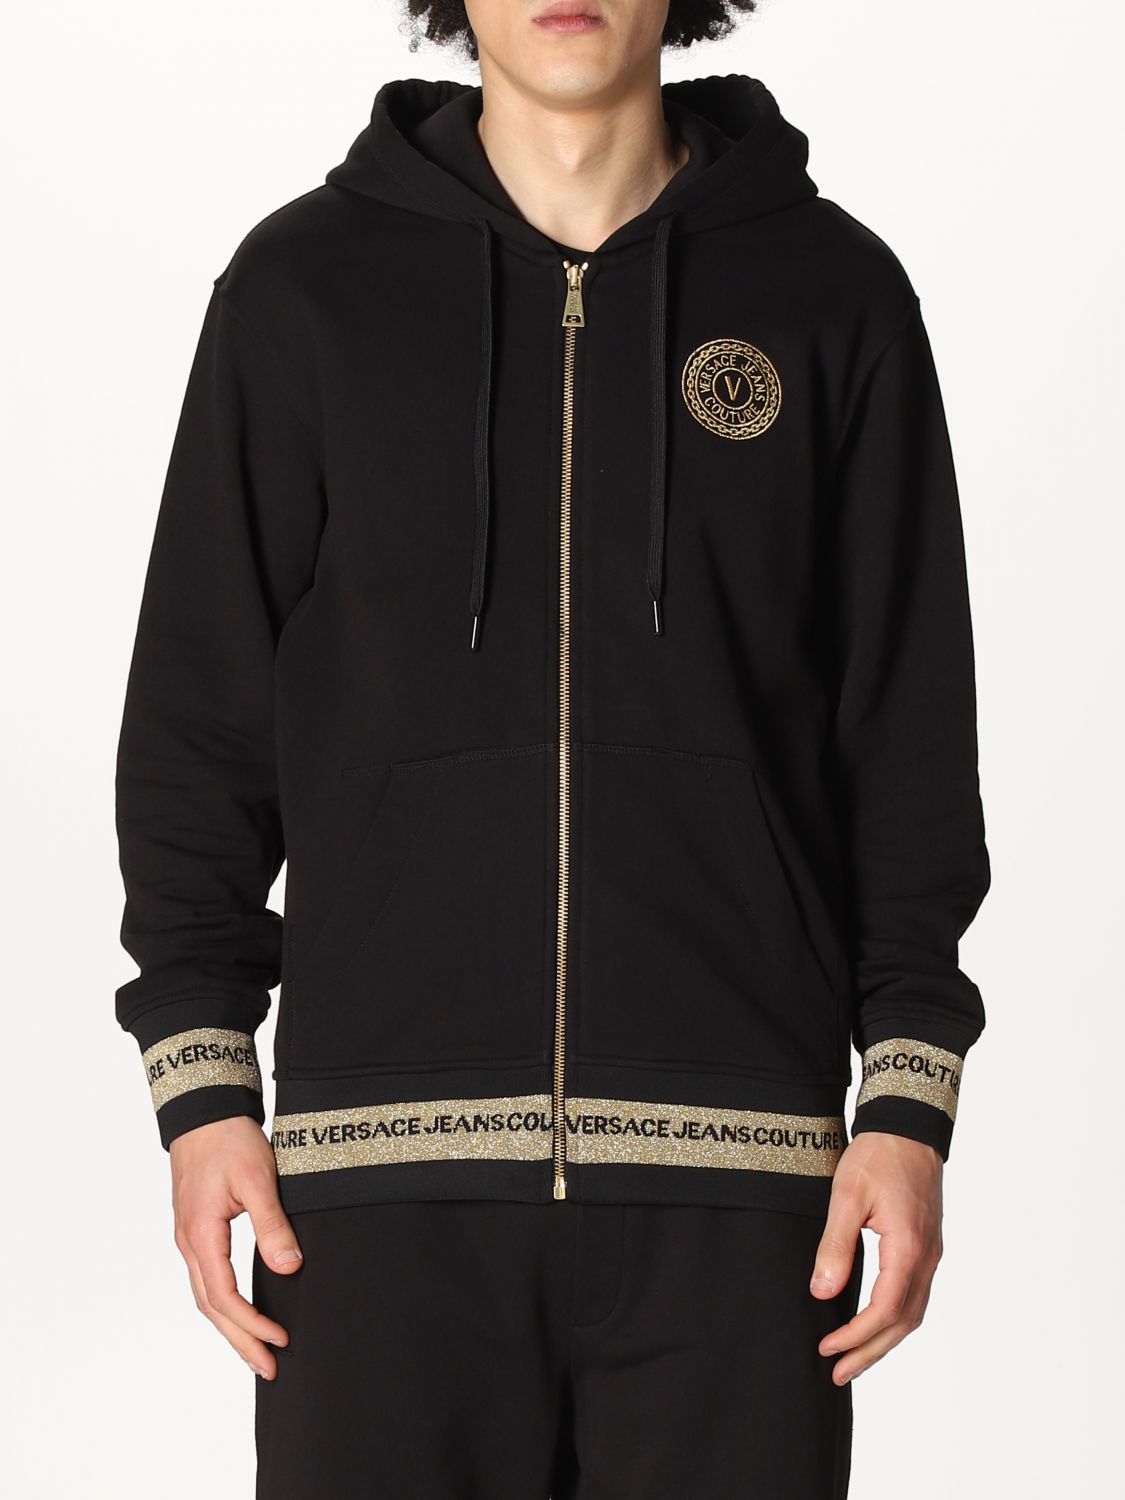 VERSACE JEANS COUTURE: hoodie - Black | Versace Jeans Couture ...